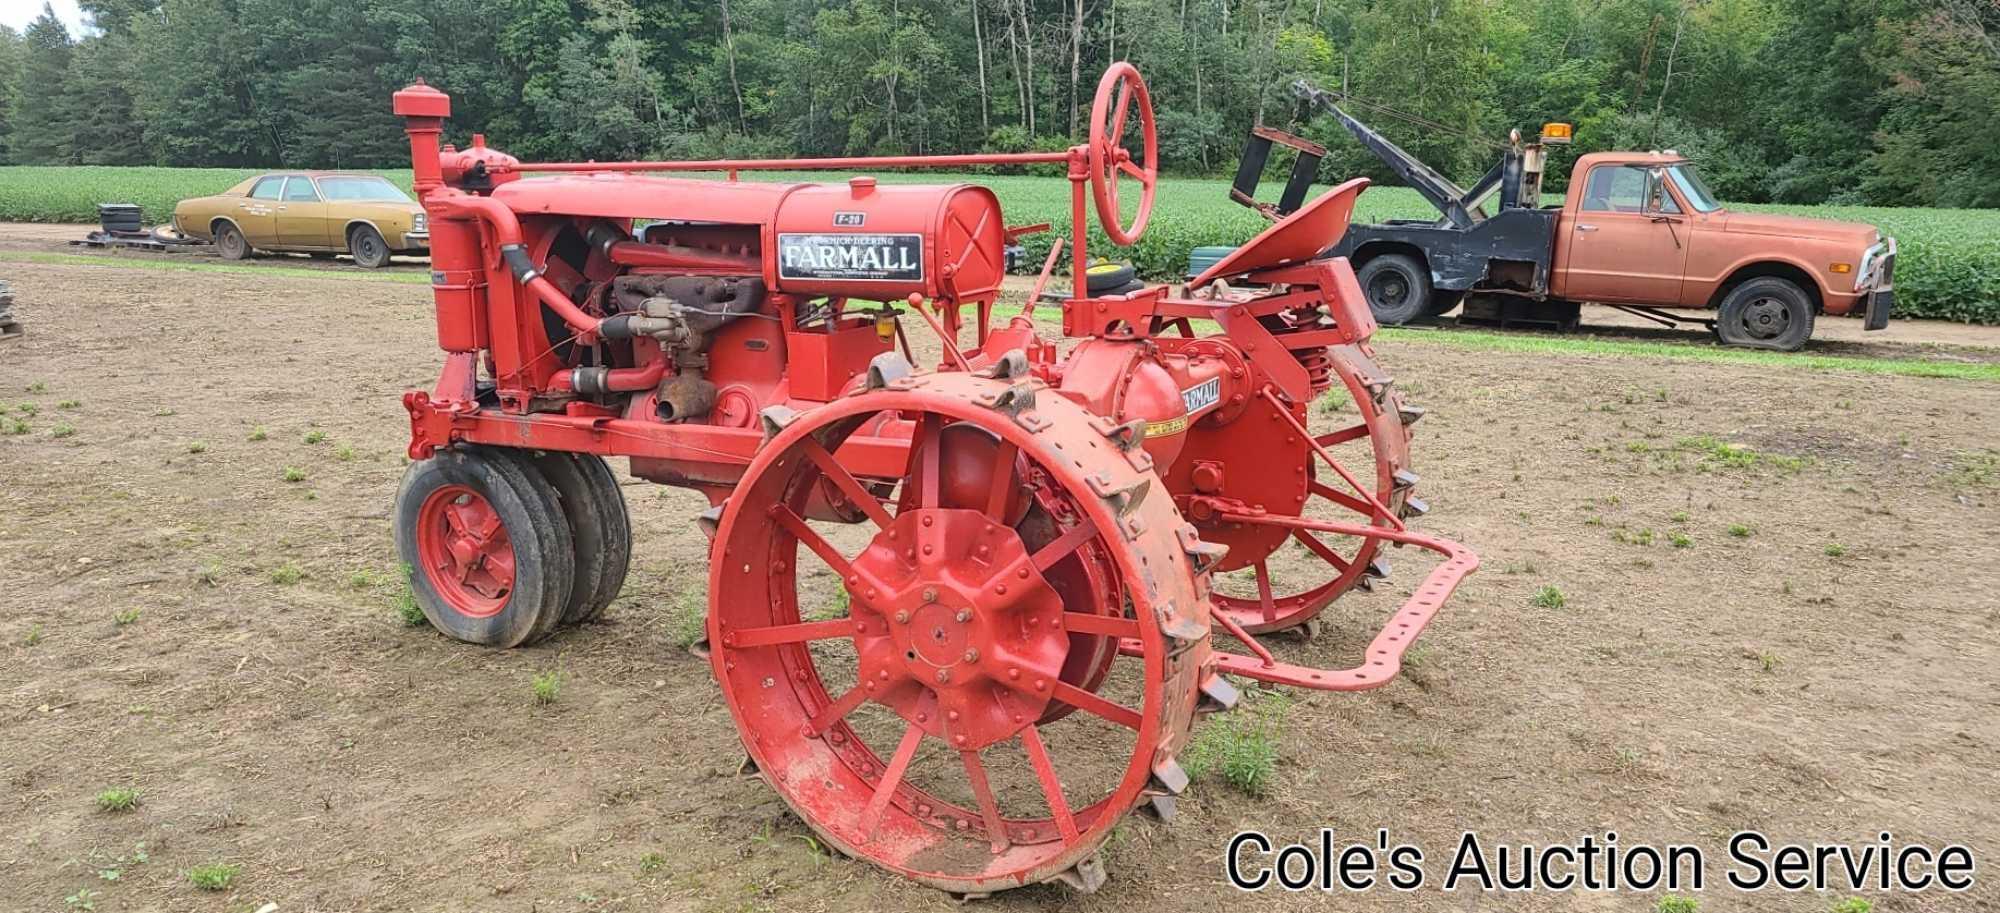 1934 McCormick Deering Farmall F-20 row crop narrow front end tractor in great condition. Serial